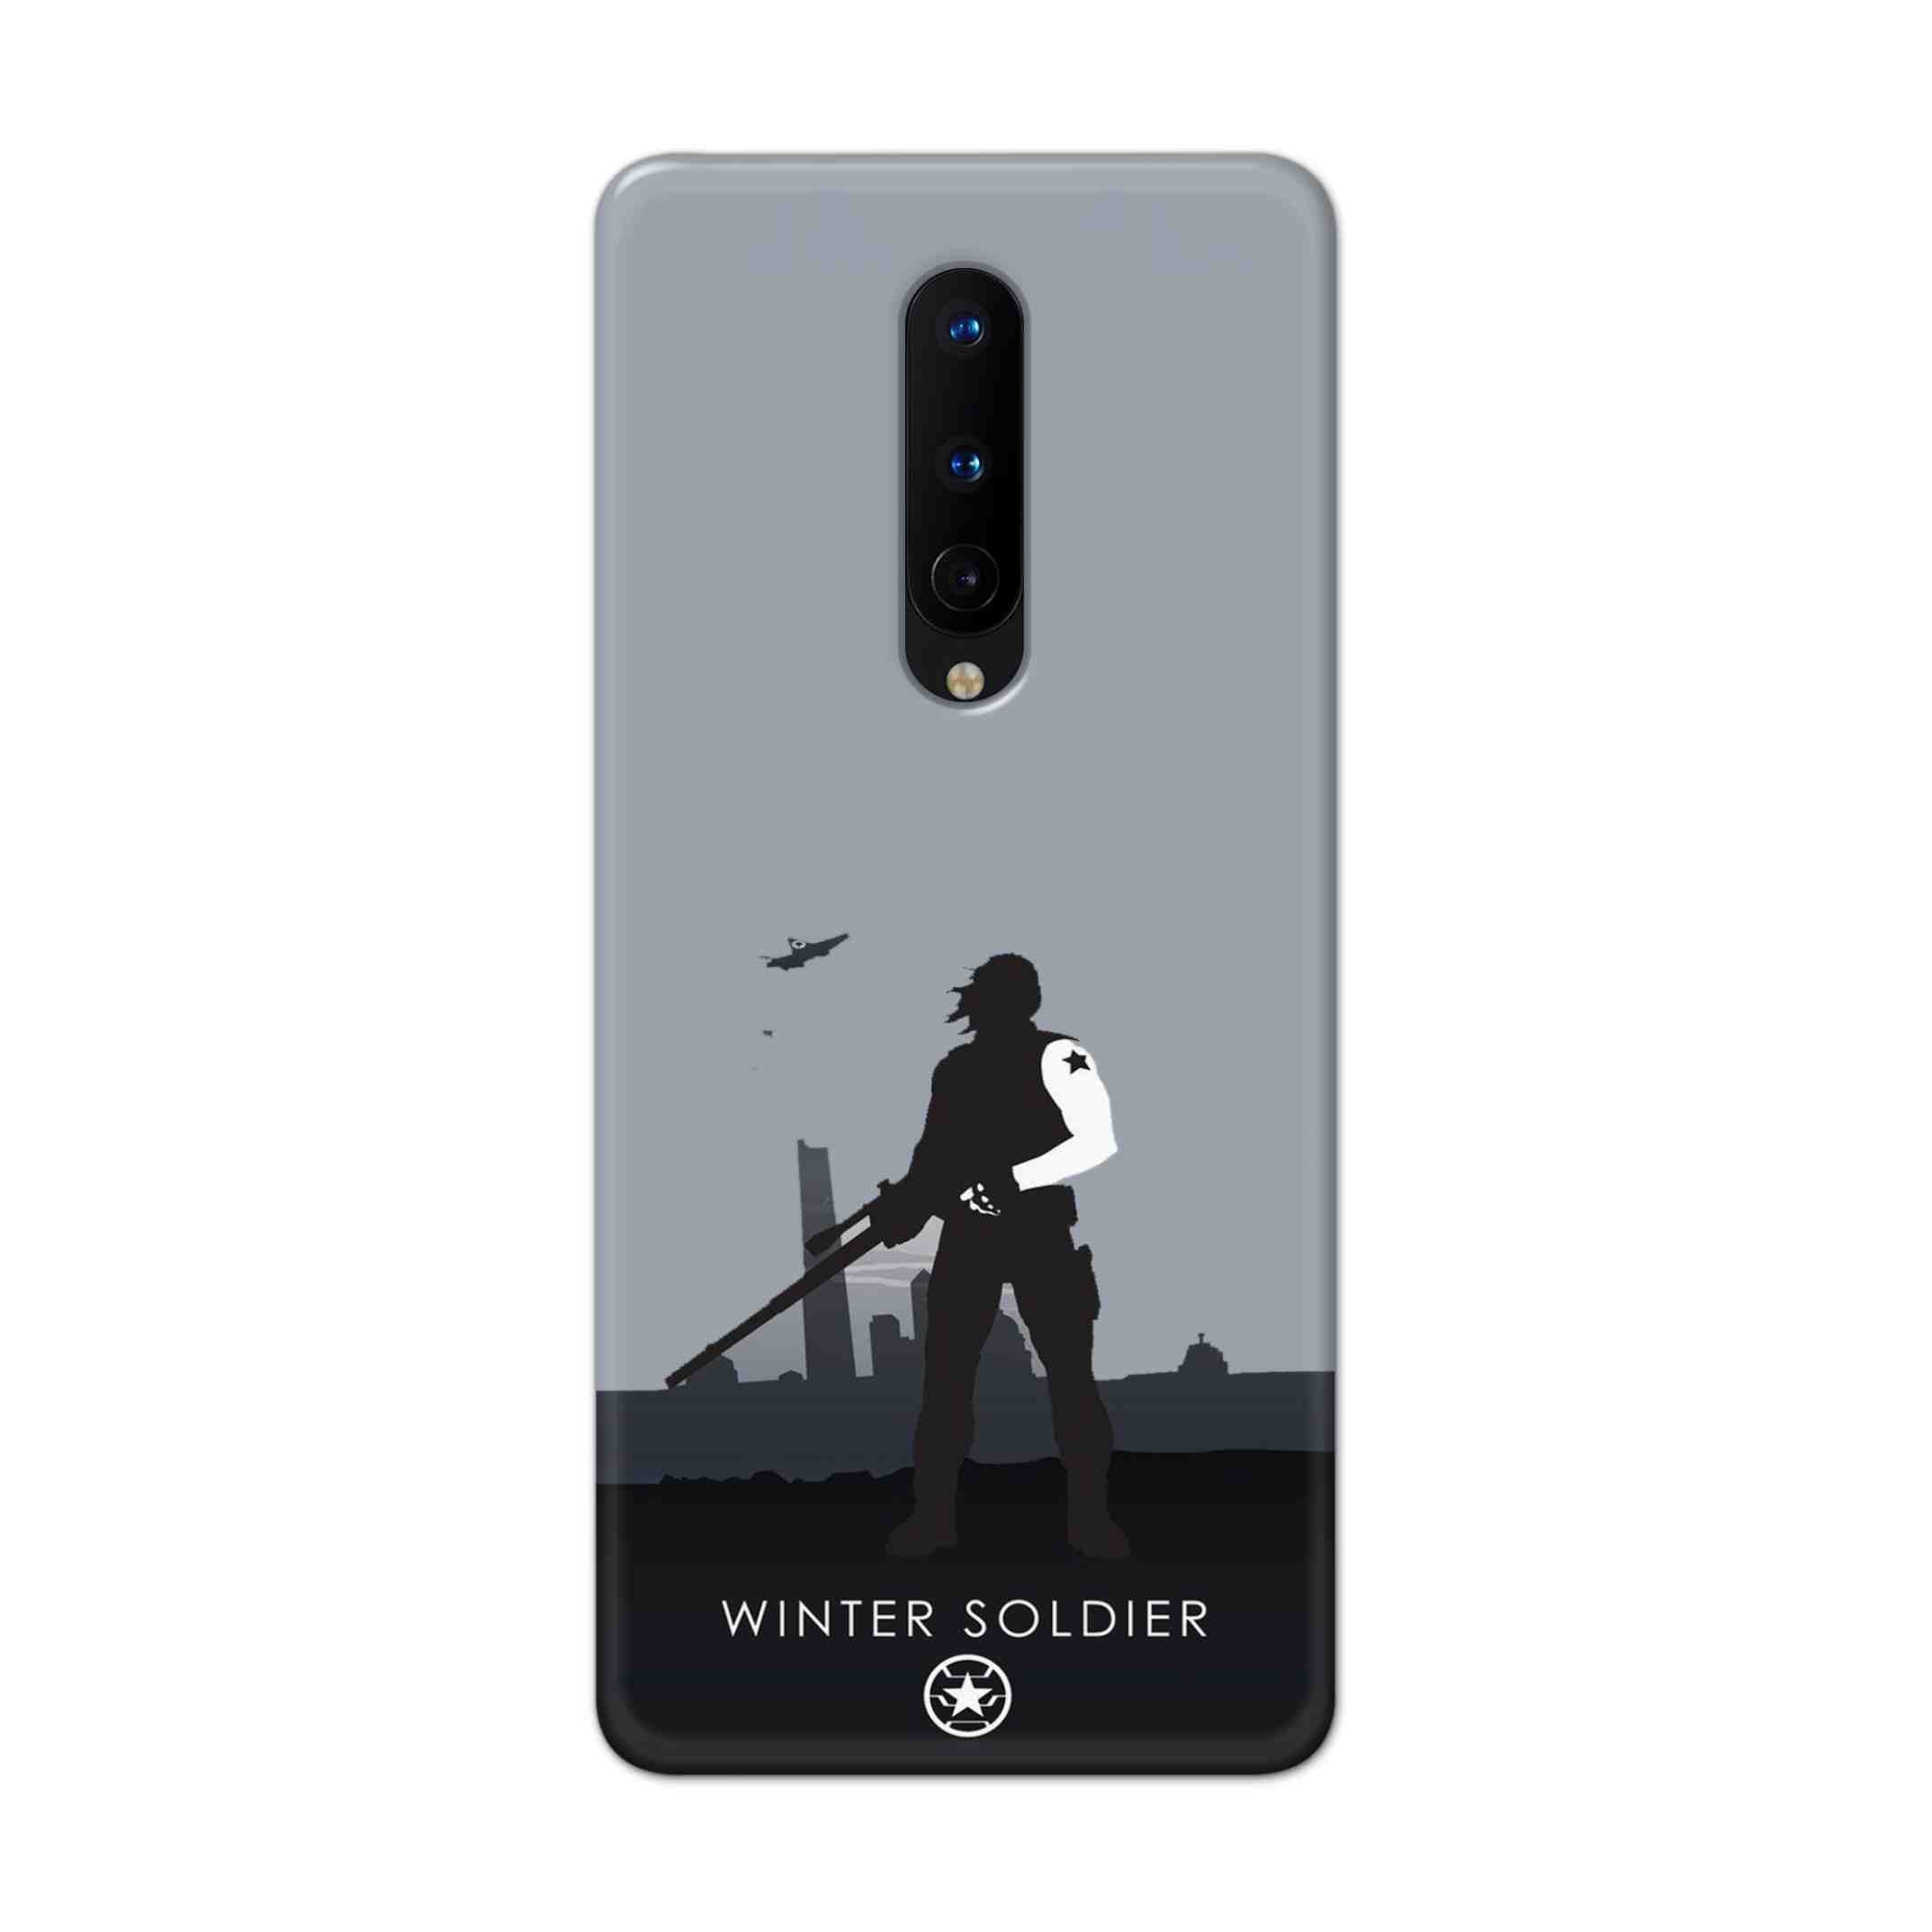 Buy Winter Soldier Hard Back Mobile Phone Case Cover For OnePlus 8 Online